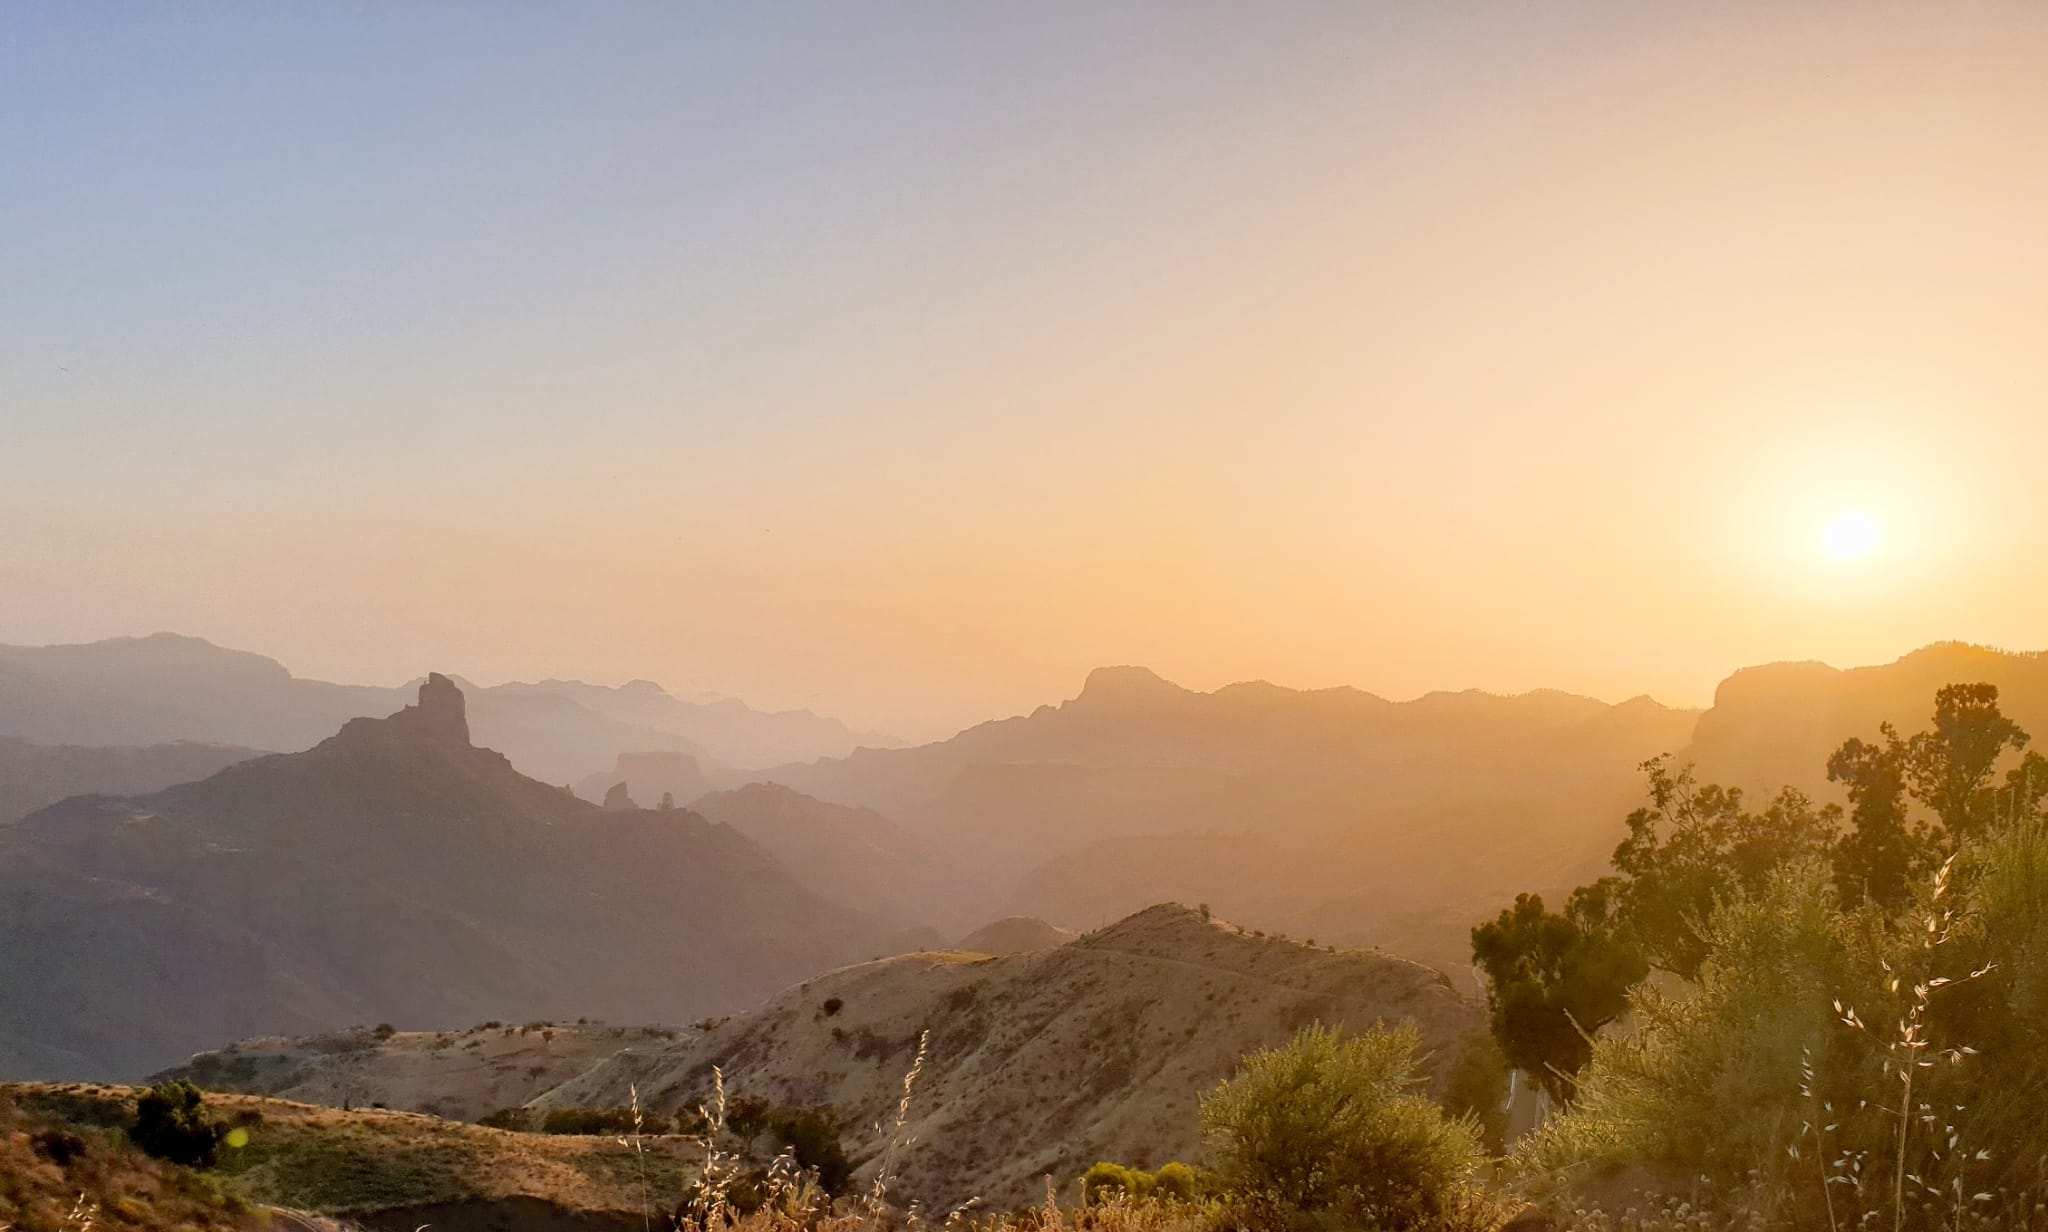 A view of Gran Canaria at sunset, with Roque Nublo in the distance.